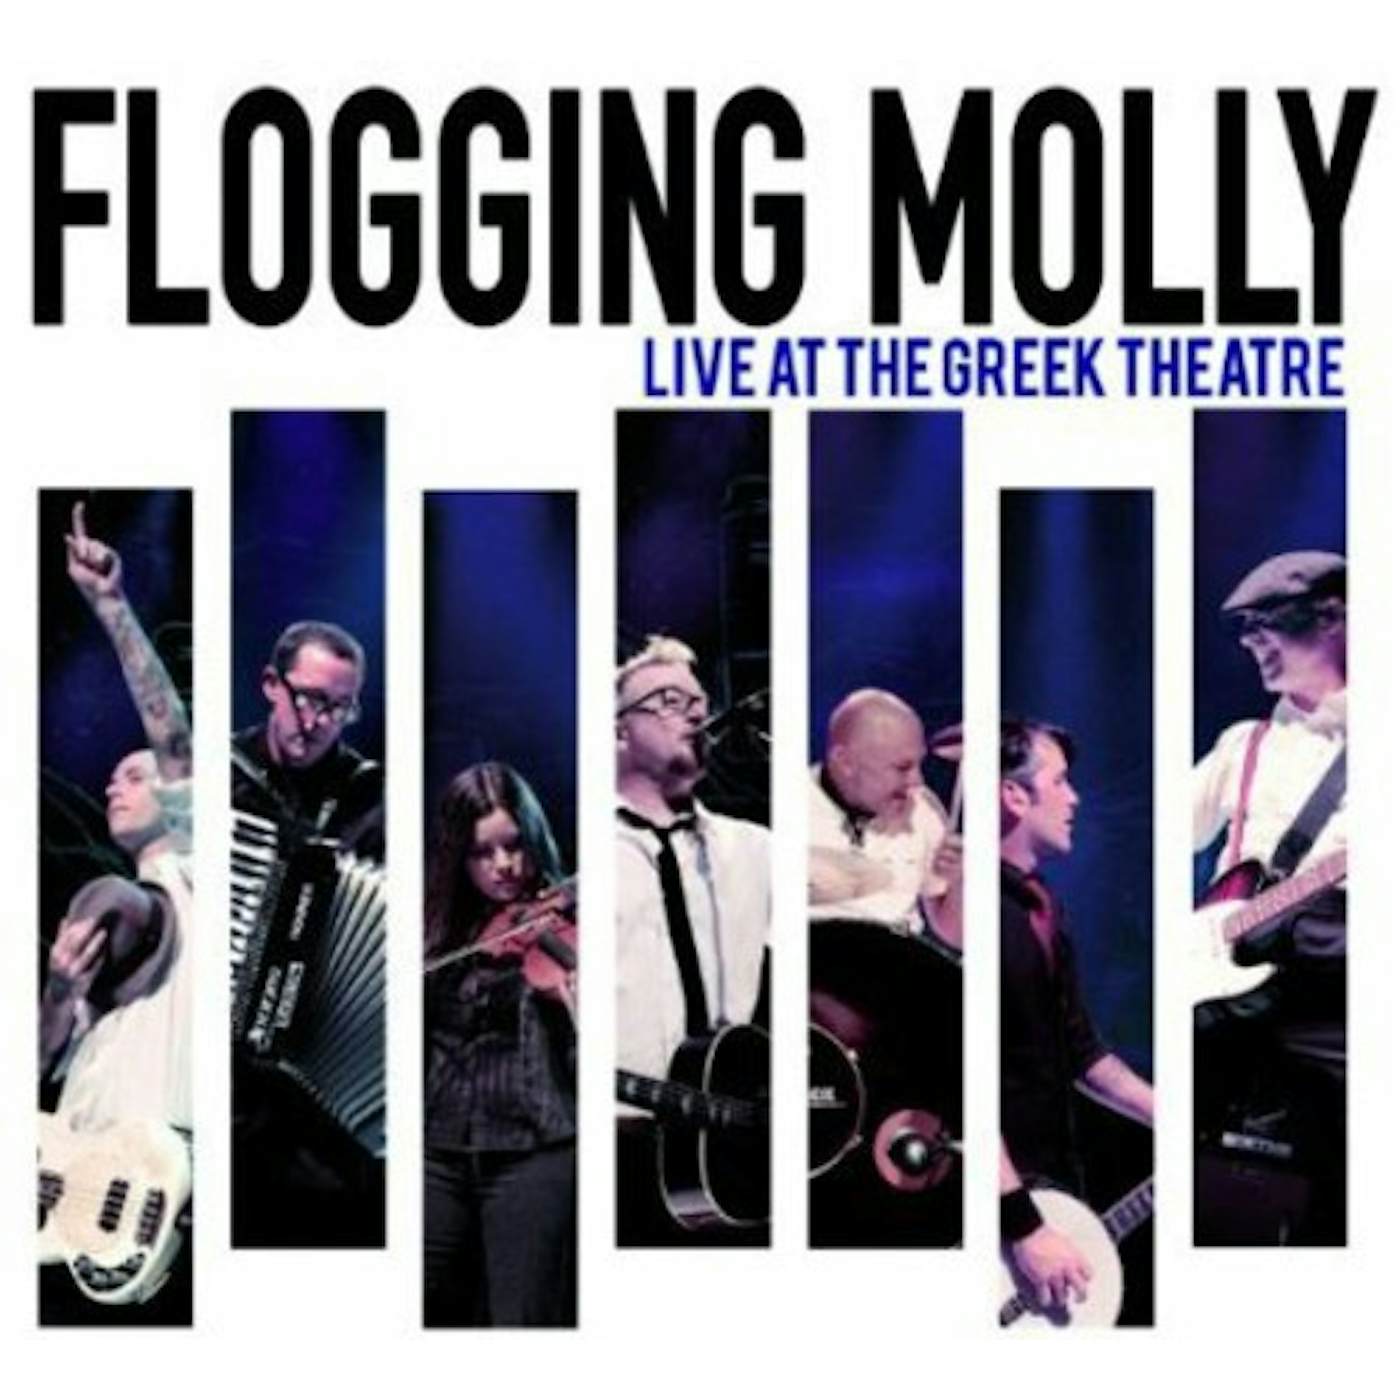 Flogging Molly LIVE AT THE GREEK THEATRE Vinyl Record